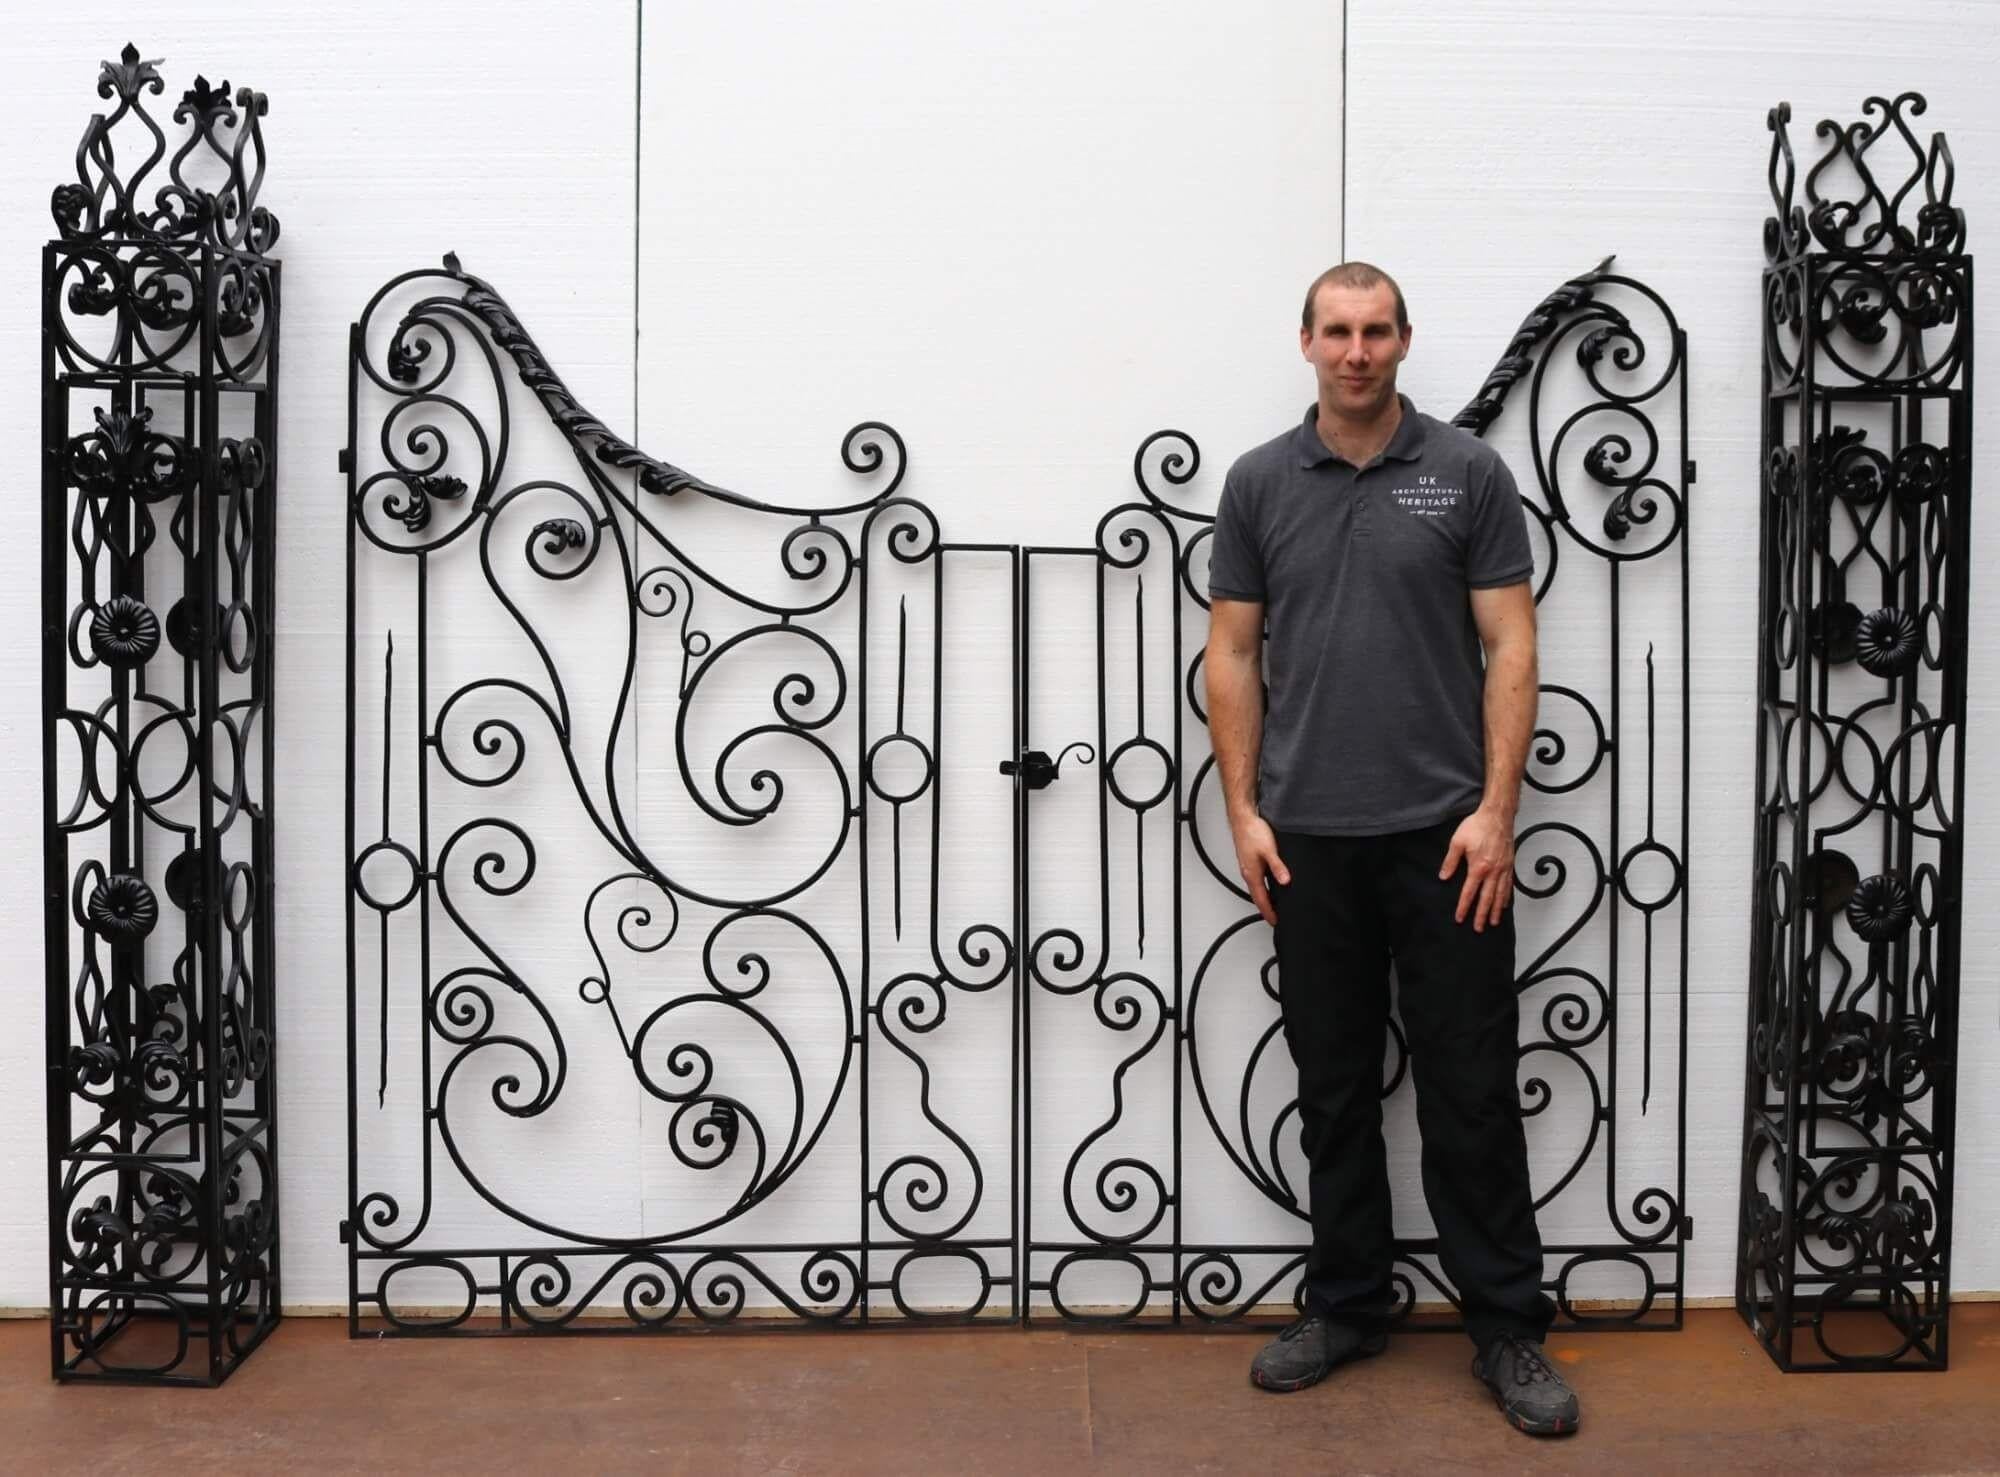 Blacksmith-made in the mid 20th century, this set of tall wrought iron driveway gates with accompanying posts are beautifully handcrafted with timeless scrolling details and unusual sweeping arches. These antique driveway gates originate from France